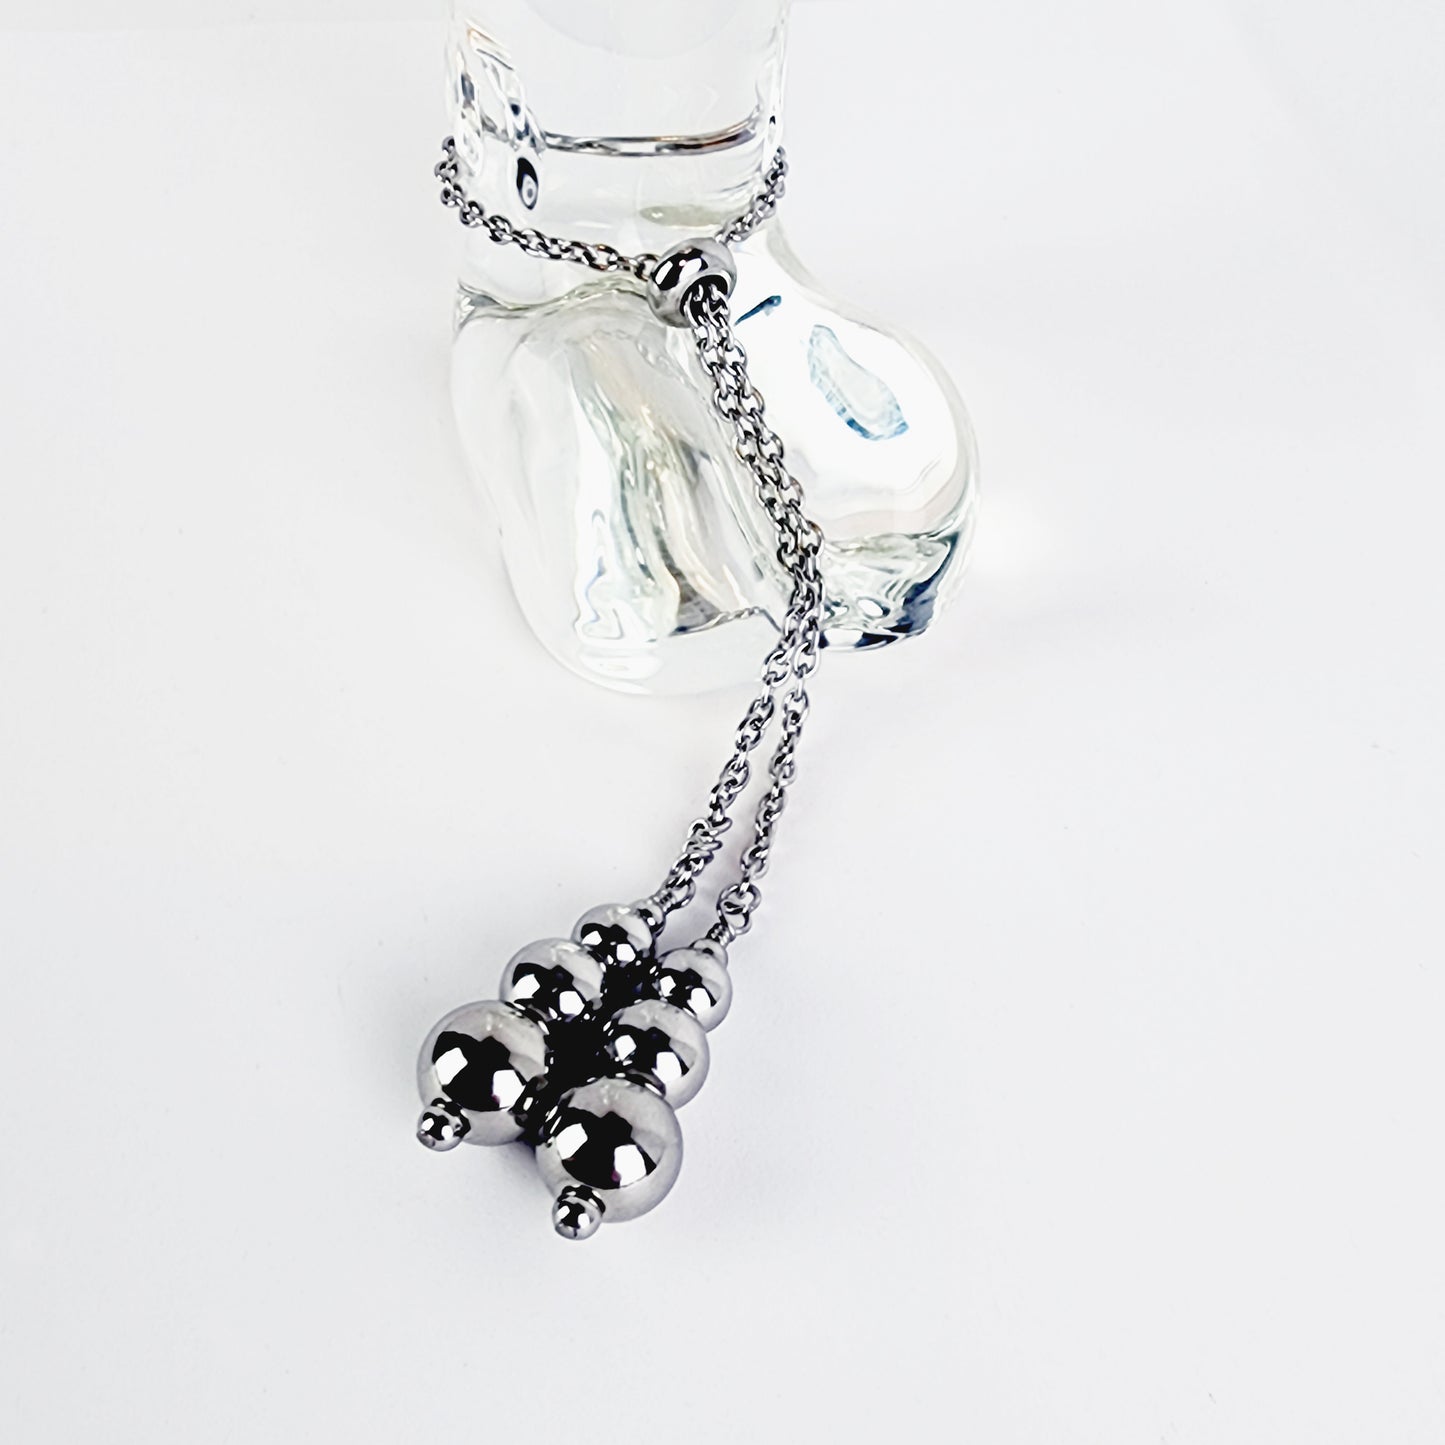 Stainless Steel Weighted Penis Chain Noose. Thick Chain and Heavy Beads.